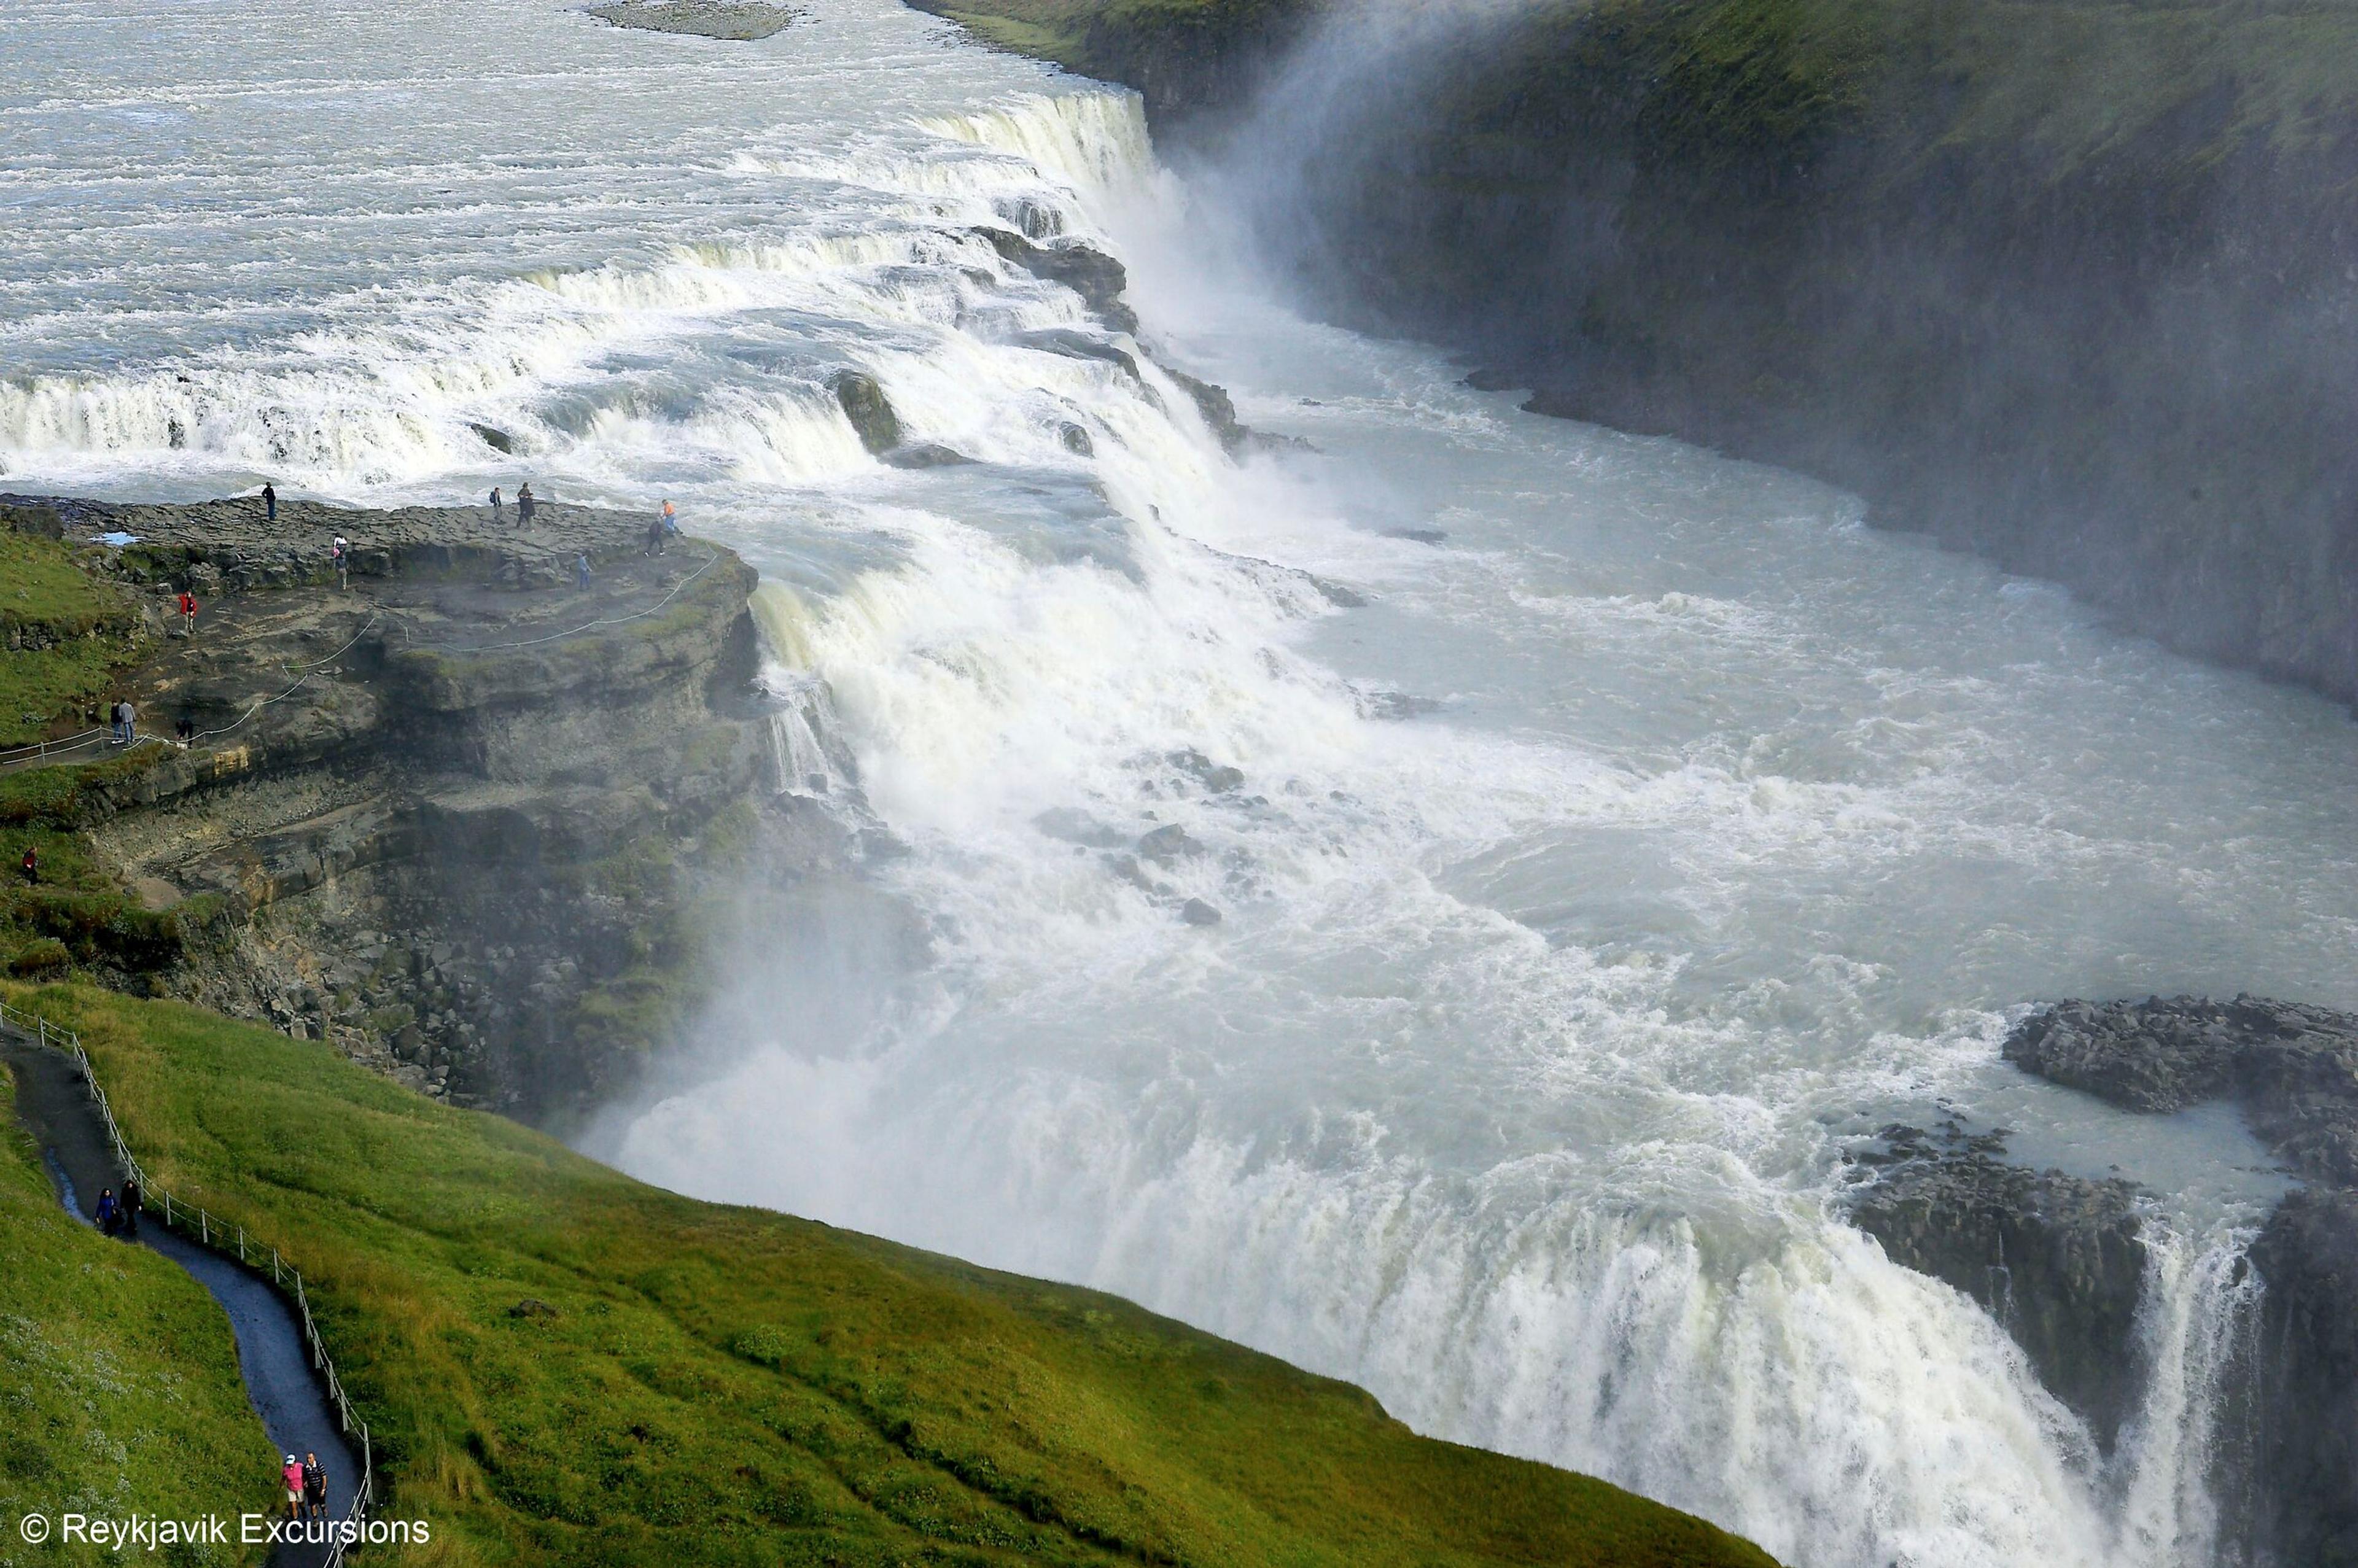 Closeóup image of Gullfoss waterfall with spectators standing in the viewing platform by the cascade